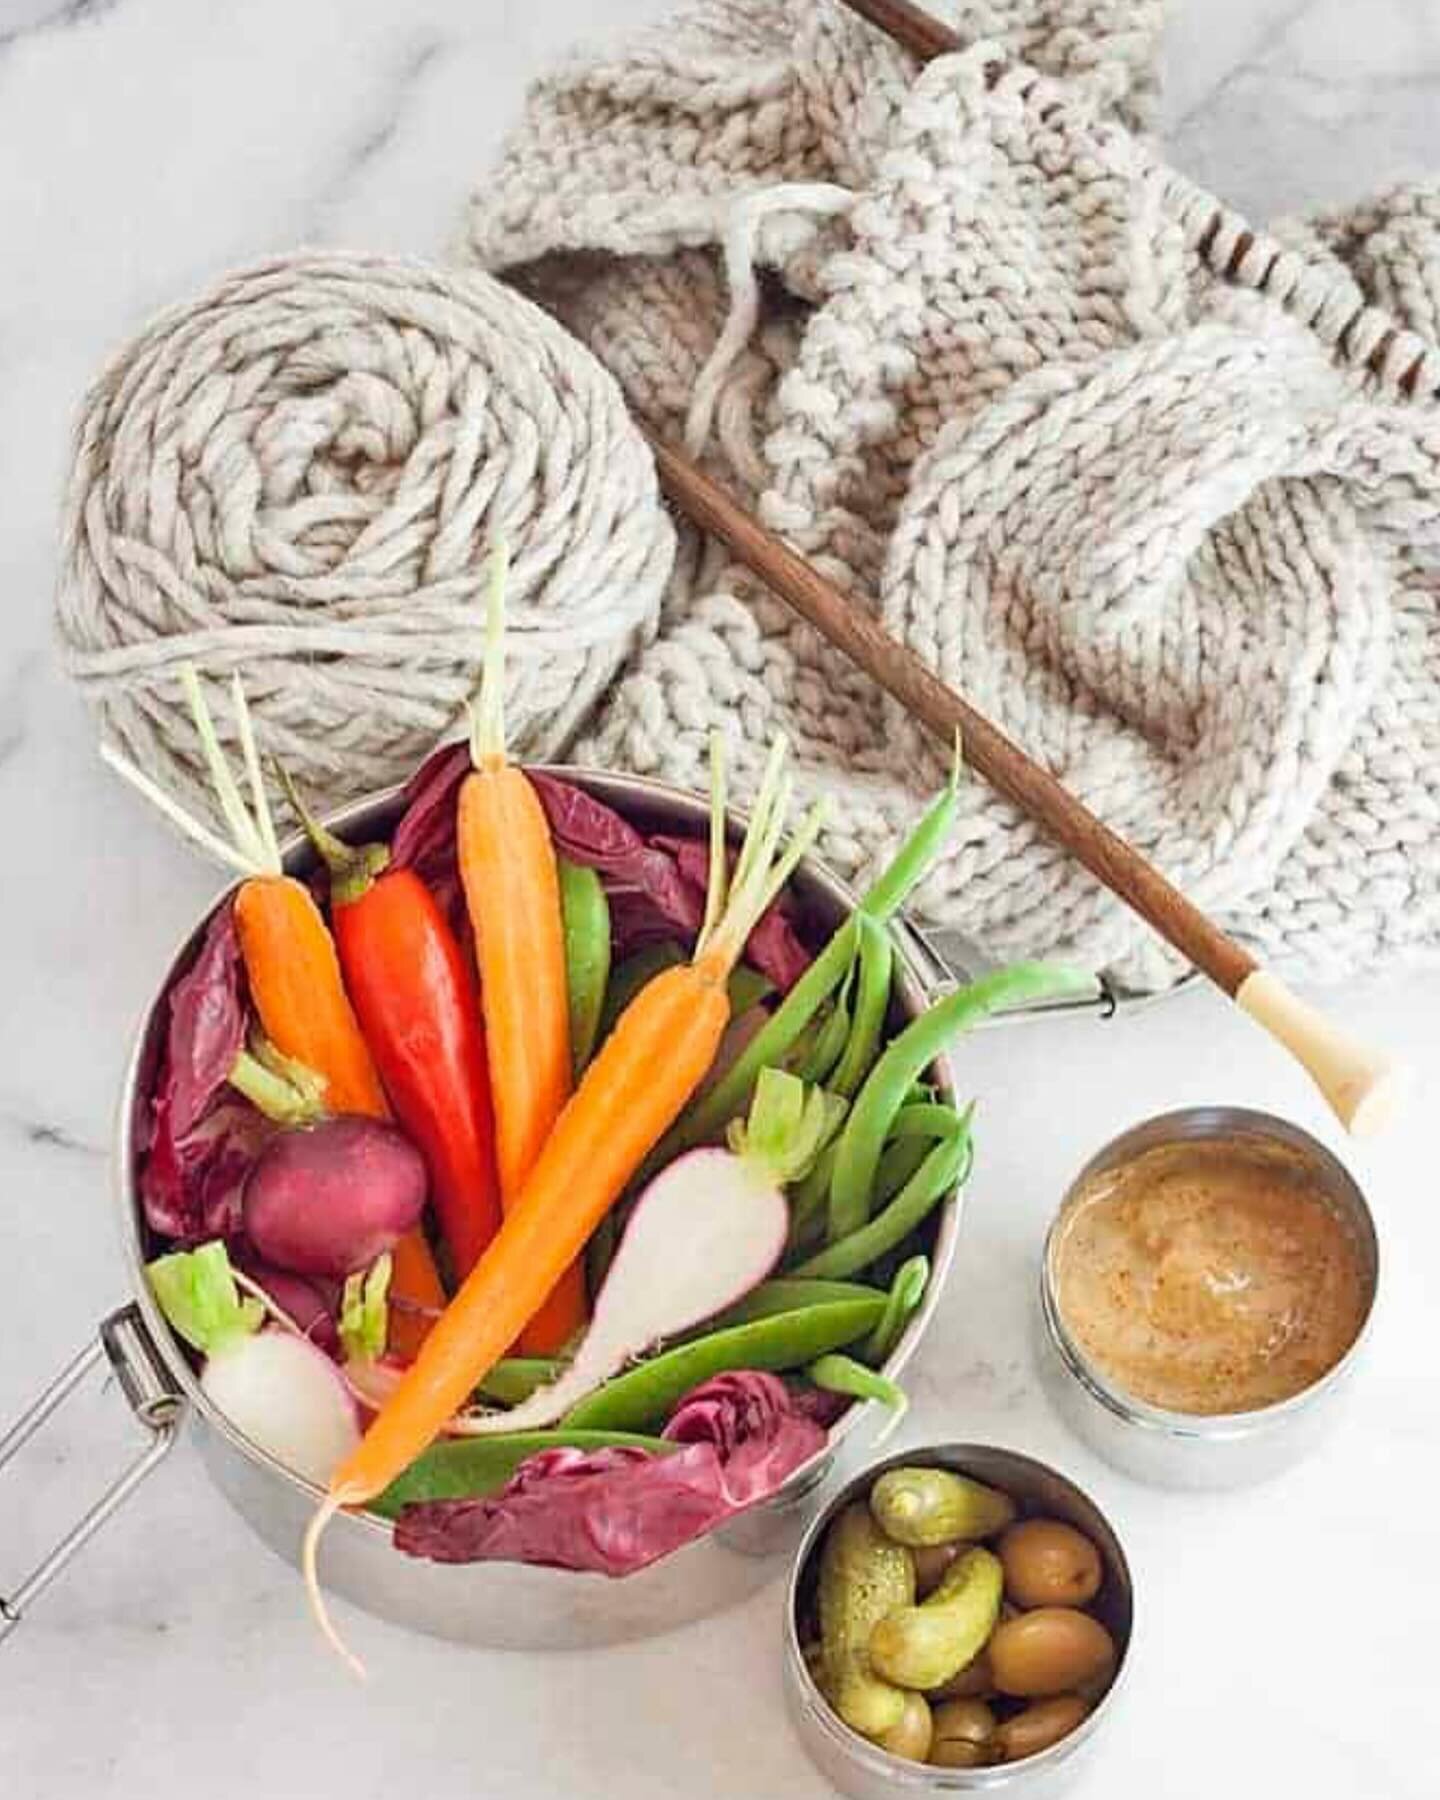 BEAUTIFUL FOOD BY DESIGN |  Eat your veggies! Almond-Sesame Dip is one recipe to help meet the challenge. A simple Bijouxs Basics that is first a savory dip for raw veggies that travels well for lunches, then easily transforms into salad dressing and